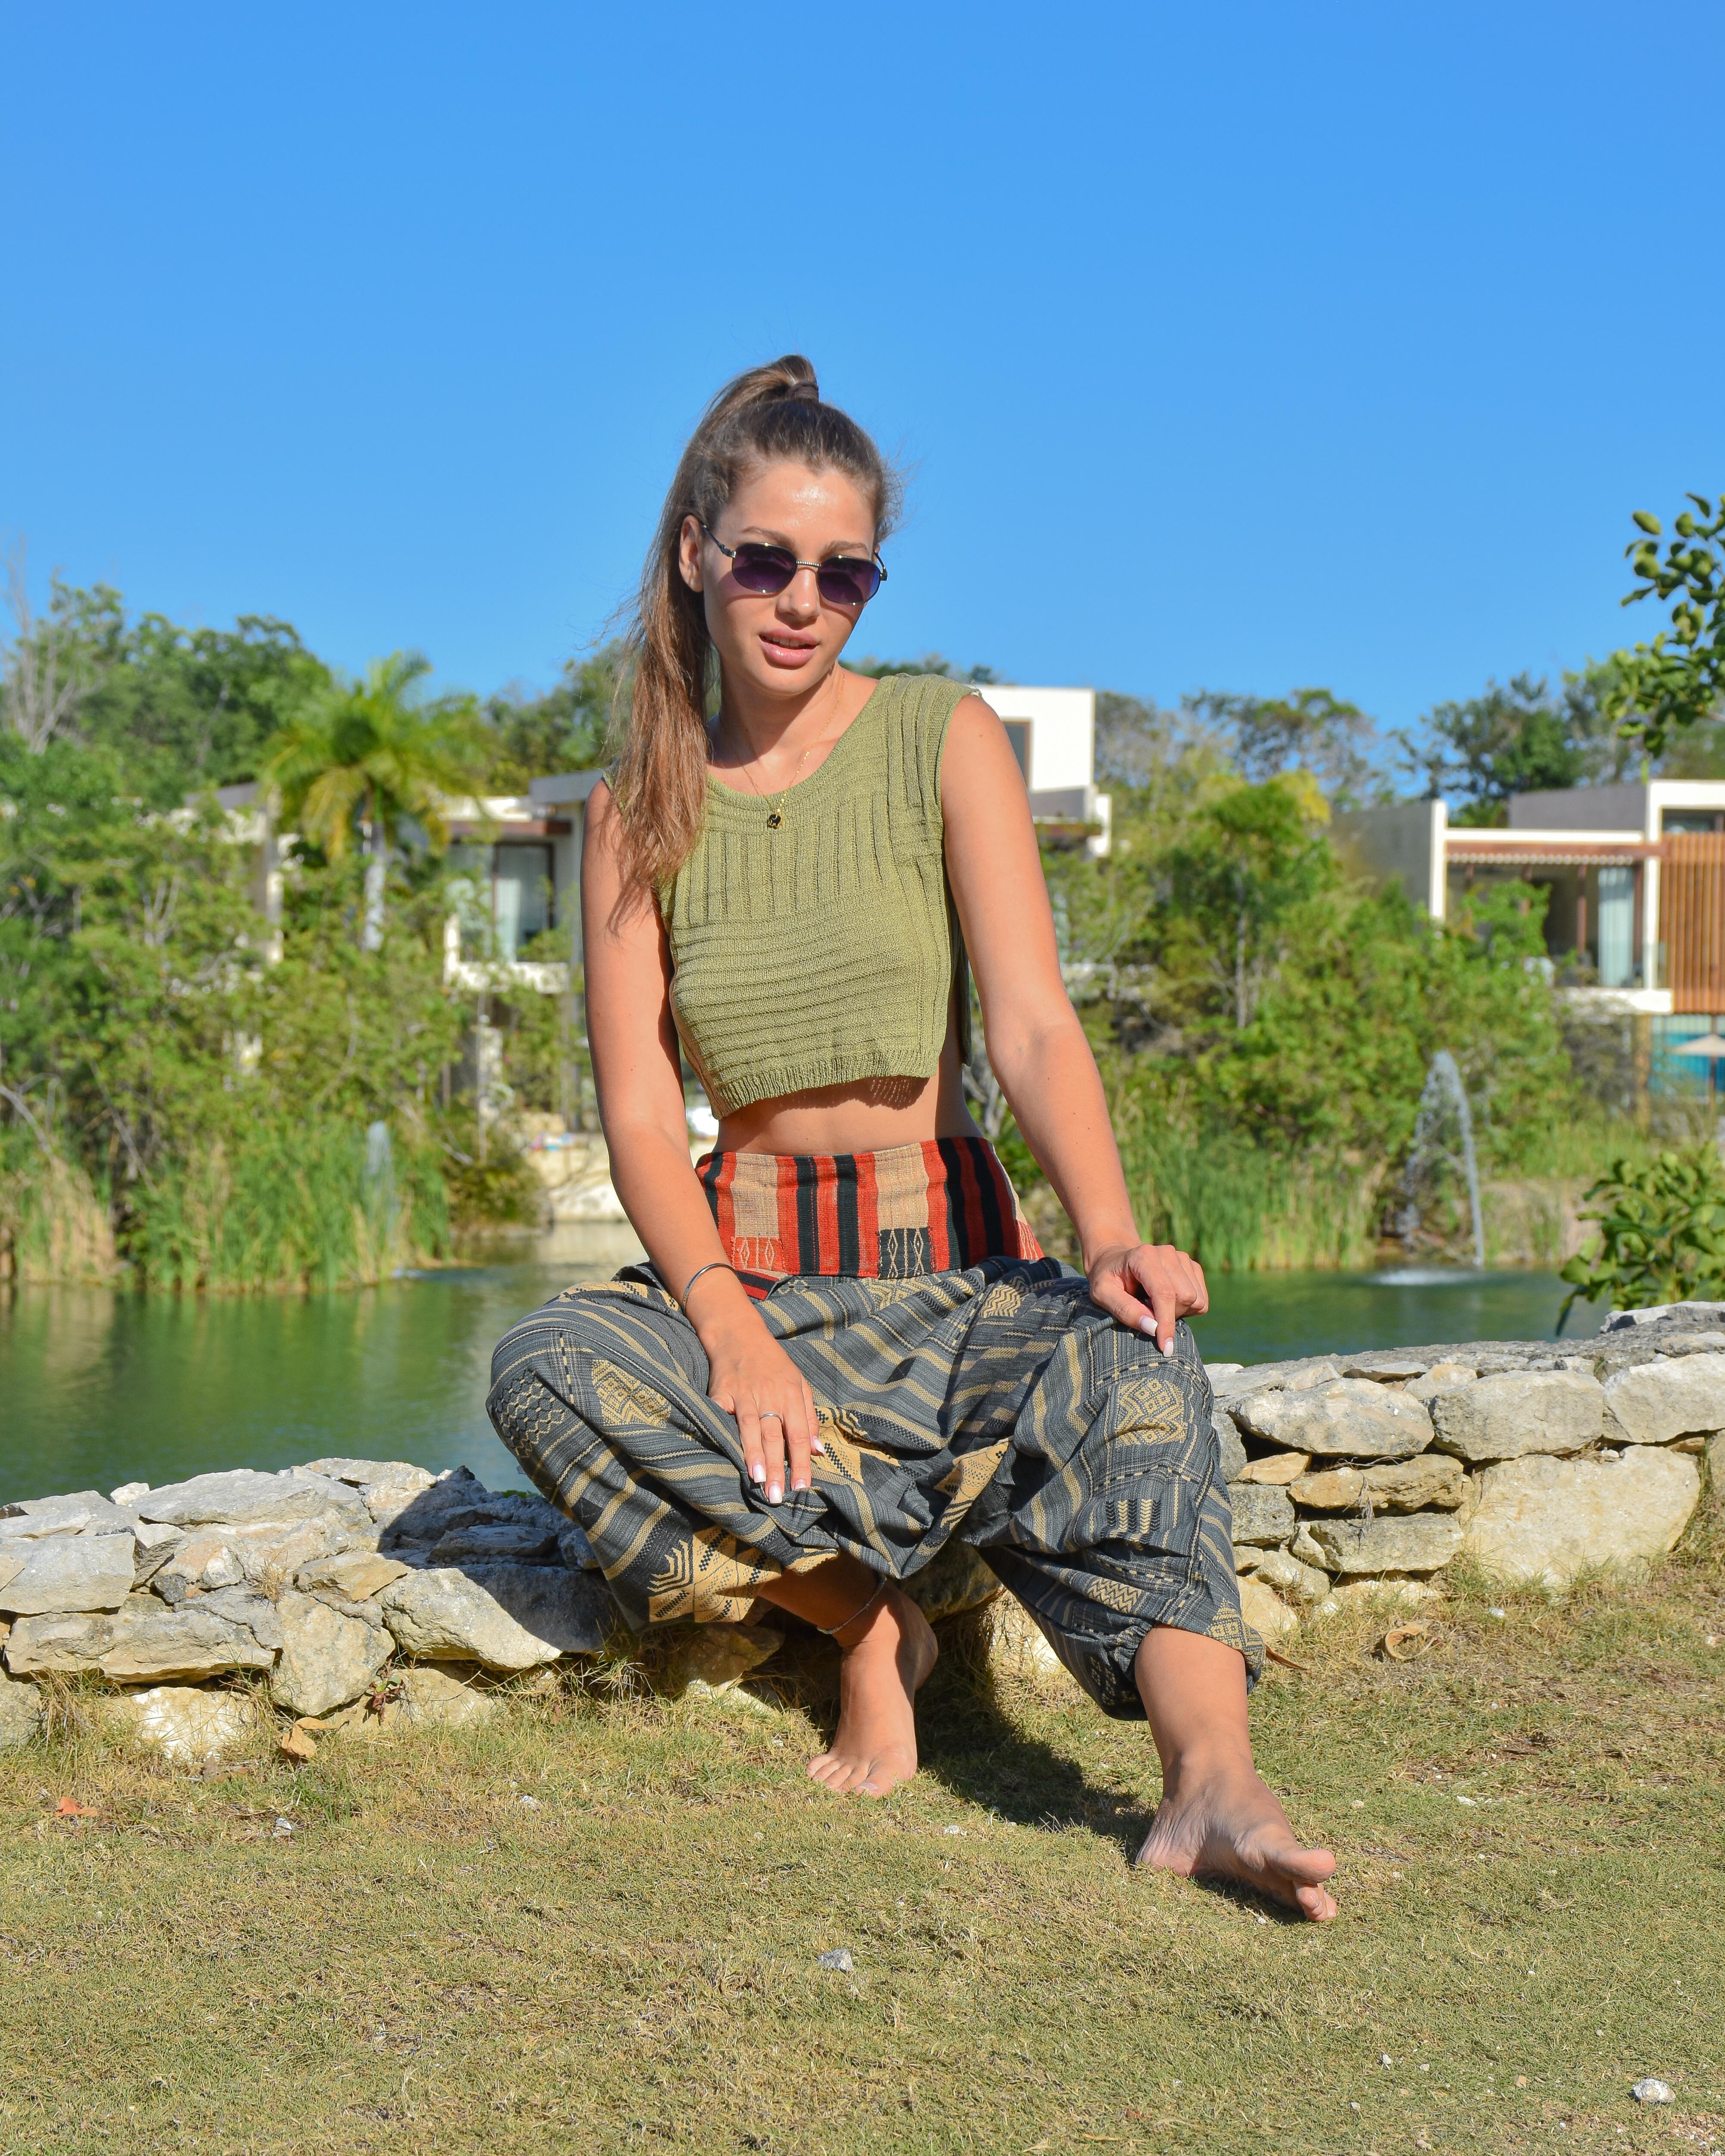 ANTALYA PANTS Elepanta Unisex Casual Pants - Buy Today Elephant Pants Jewelry And Bohemian Clothes Handmade In Thailand Help To Save The Elephants FairTrade And Vegan